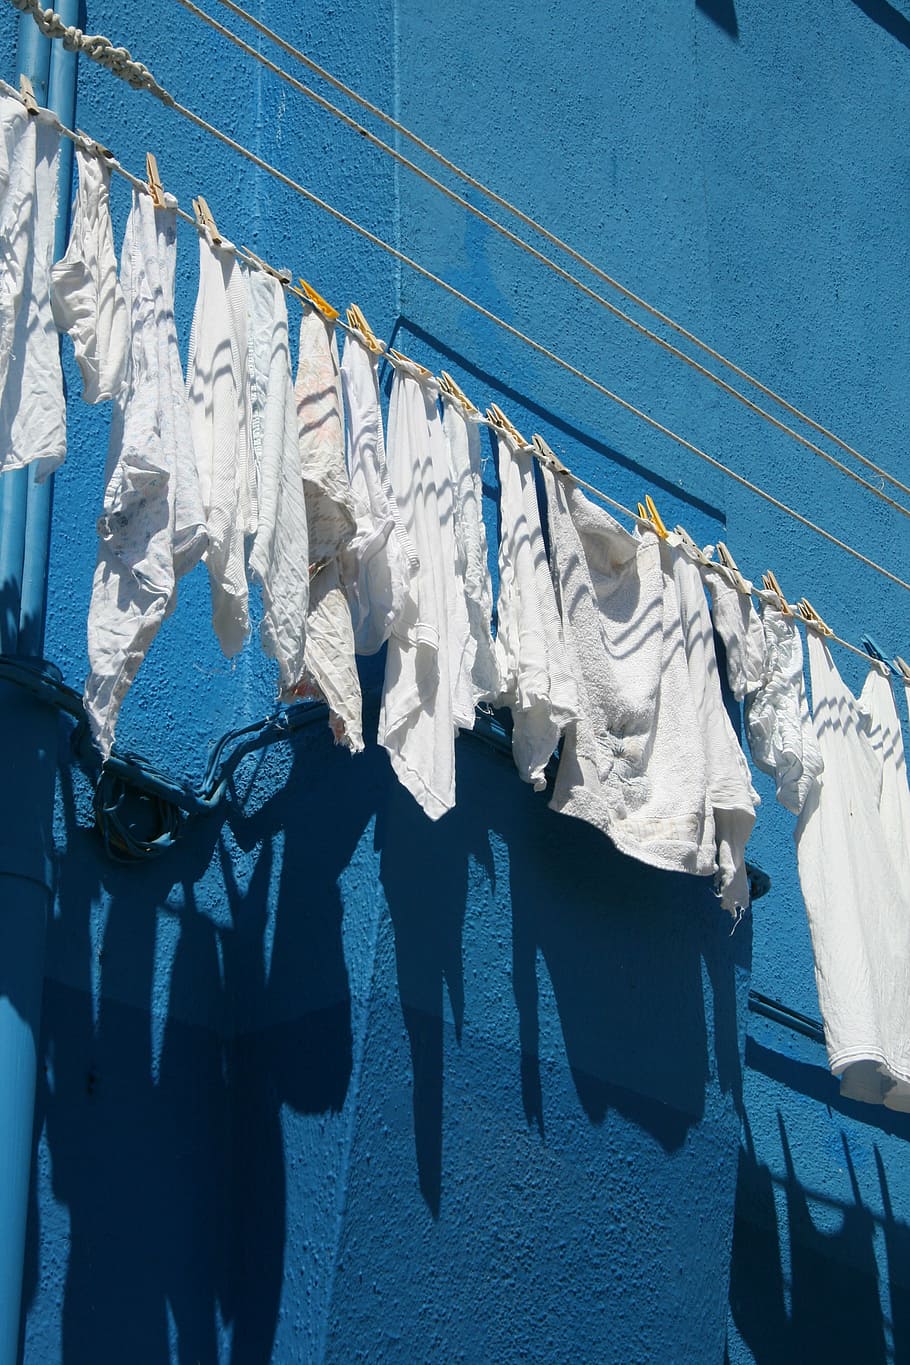 blue, white, venice, hanging, clothing, drying, textile, laundry, day, clothesline